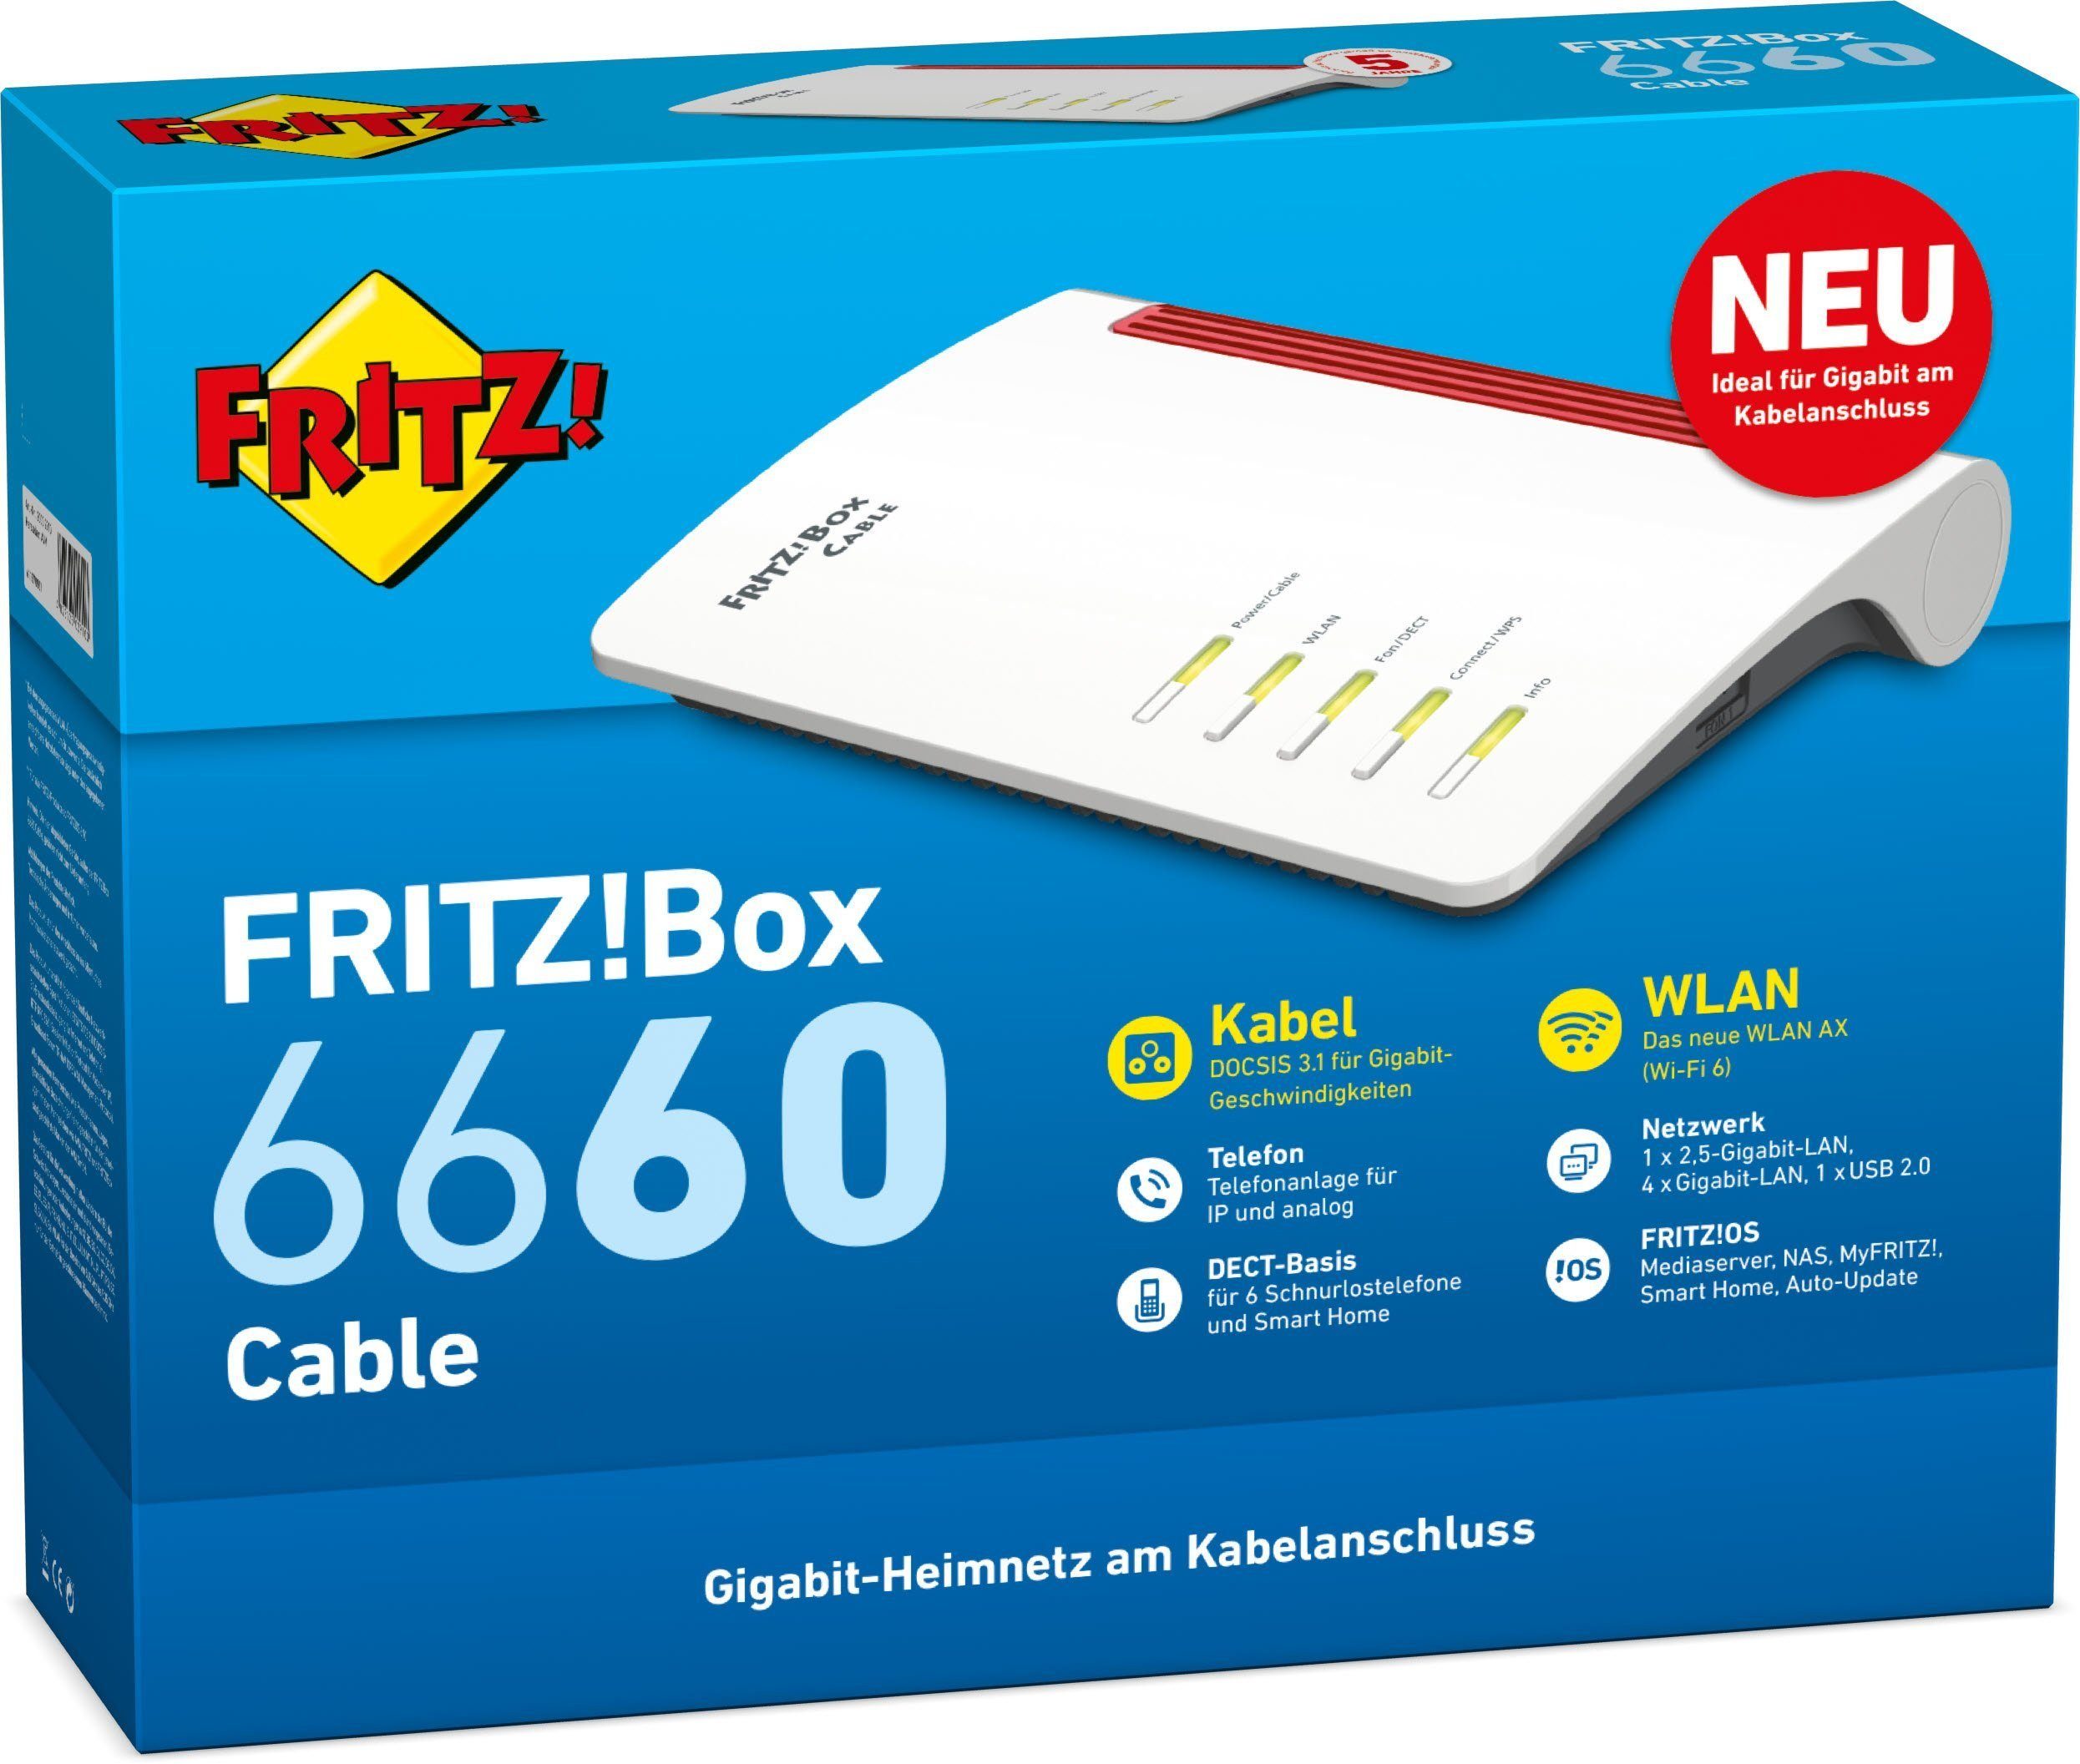 FRITZ!Box AVM WLAN-Router Cable 6660